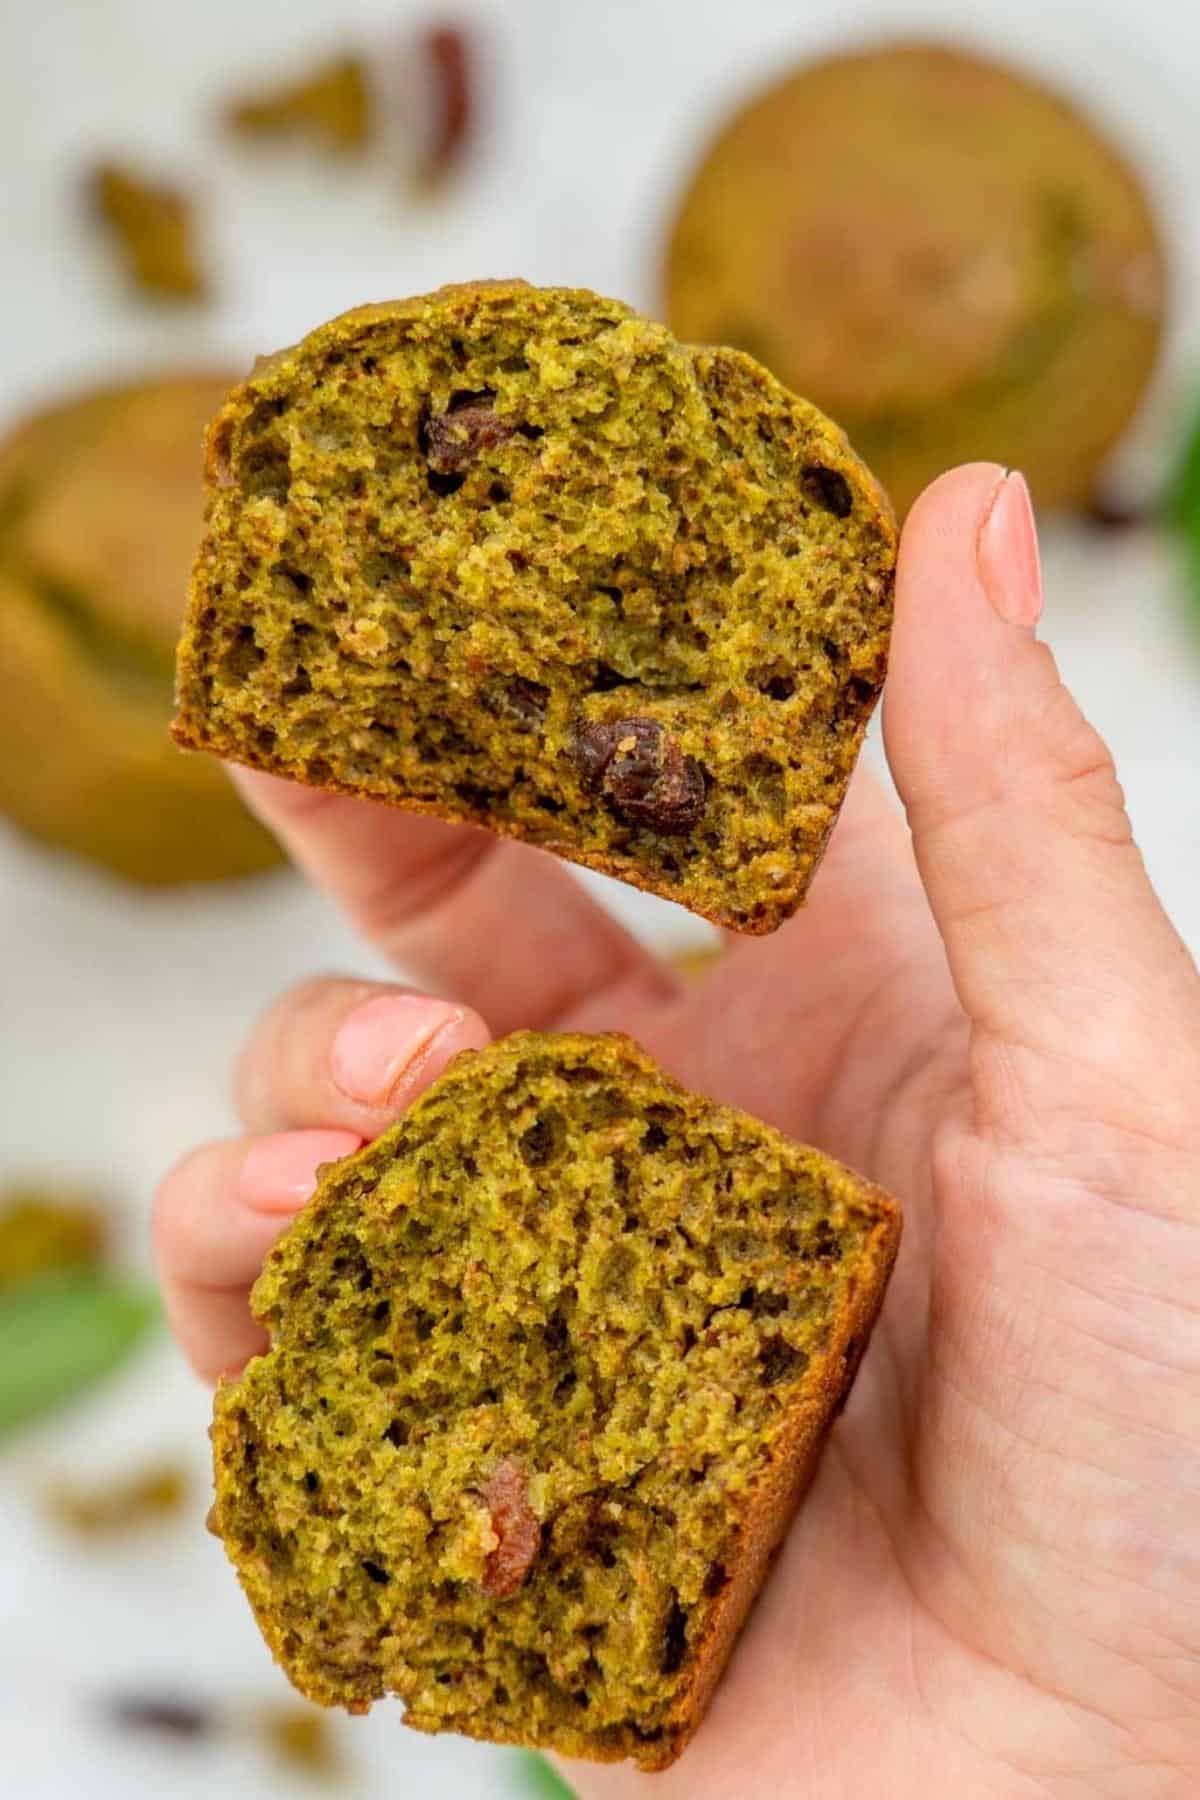 A muffin broken in half to reveal it's inside texture,  raisins visible.